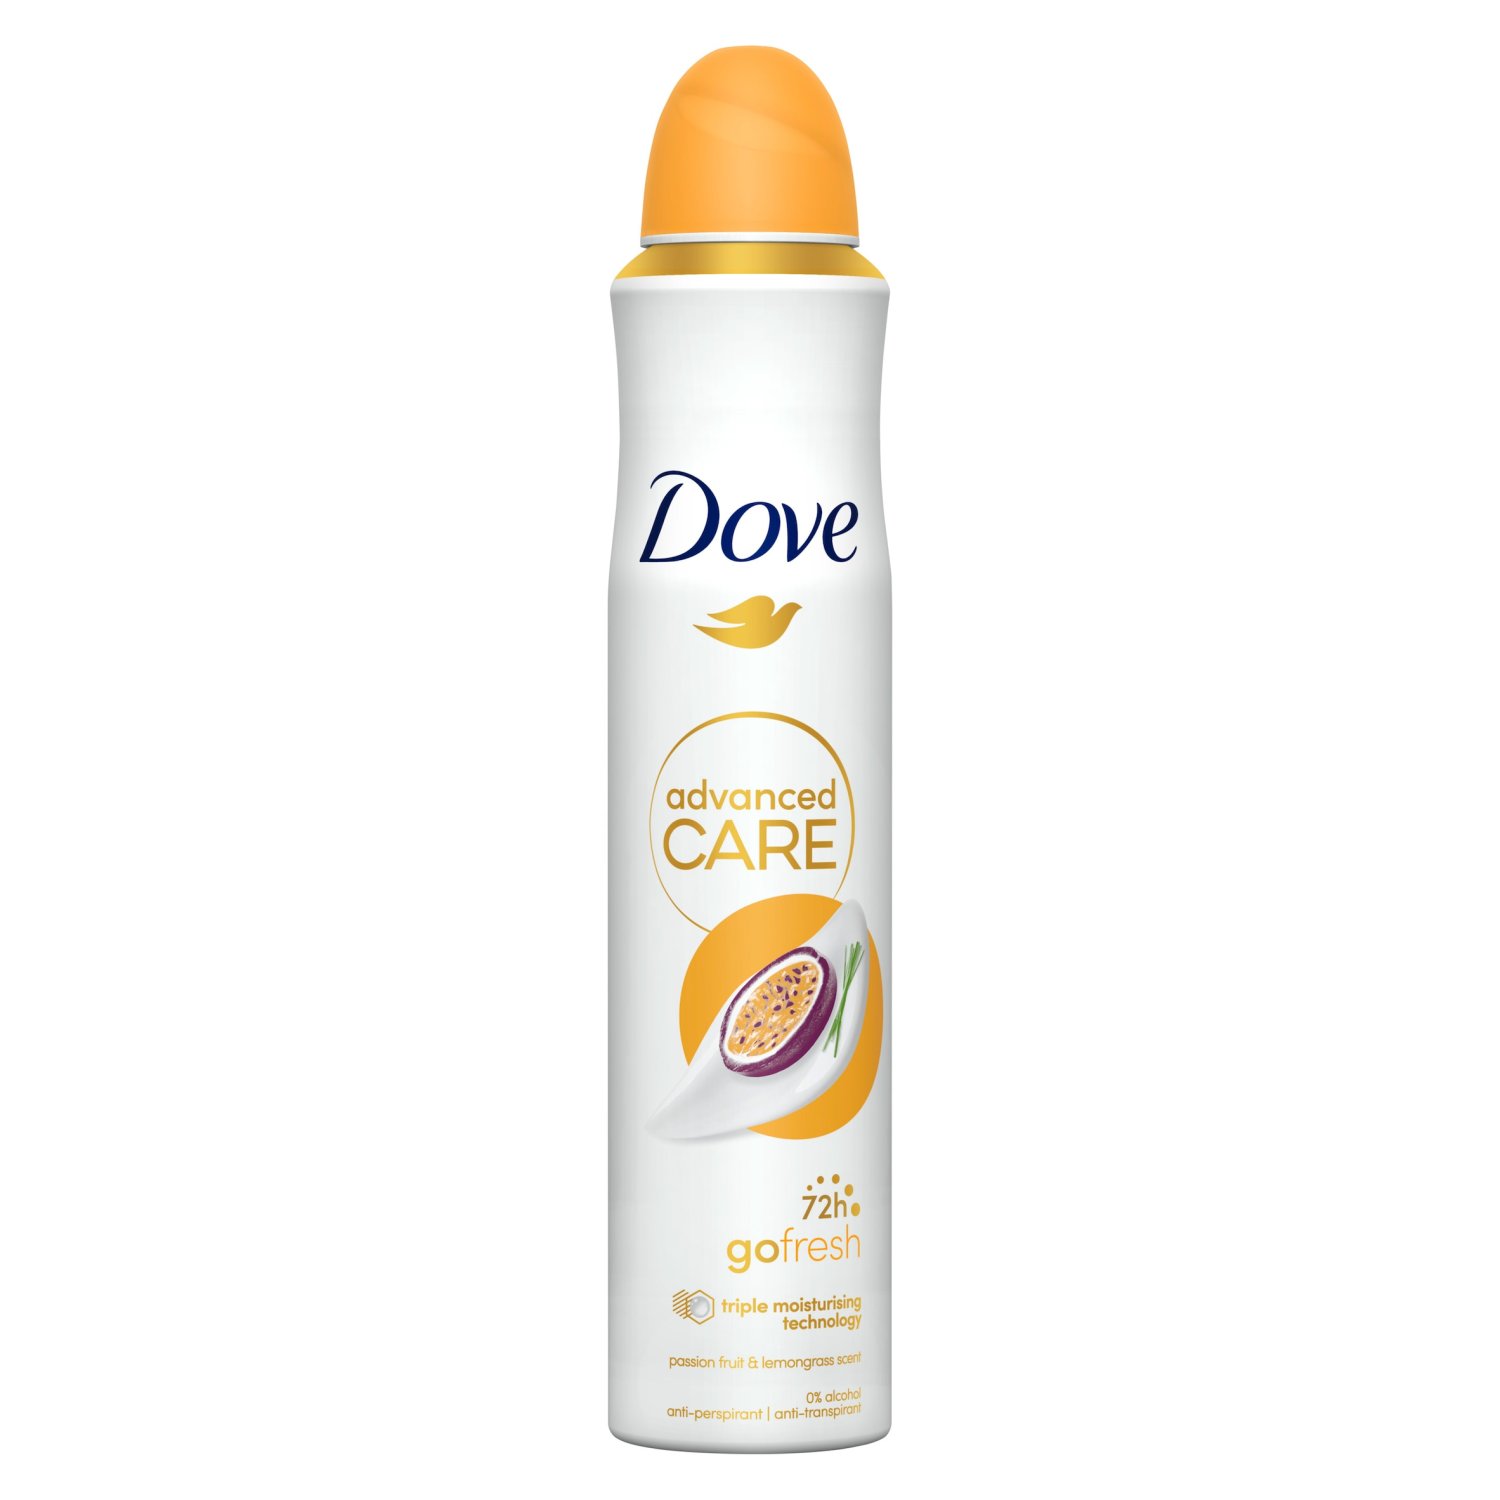 New Dove Advanced Care, our most caring antiperspirant range with triple moisturising technology. Effective 72h protection, kind to skin, even after shaving.

1. Dove Advanced Care Go Fresh Passion Fruit & Lemongrass Scent Anti-perspirant Deodorant Spray features an alcohol-free, kind-to-skin formula
2. This Go Fresh deodorant gives up to 72 hours of protection against sweat and odour
3. This aerosol features Triple Moisturising technology that retains moisture deep within your skin
4. Featuring Dove's most advanced formula, this anti-perspirant deodorant delivers superior skin care
5. With its tropical scent, just one spray of this anti-perspirant will whisk you away to an idyllic island
6. Globally, Dove deodorant is not tested on animals and is certified as cruelty-free by PETA

Caring for your underarms is an important part of any skin care routine. With Dove Advanced Care Go Fresh Passion Fruit & Lemongrass Scent Anti-perspirant Deodorant Spray, you can give your skin the care it deserves, while feeling fresh with 72-hour protection from odour and sweat. Featuring a fragrance combination of sweet passion fruit & zesty lemongrass, this aerosol will kick-start your day and keep you feeling energised and beautifully confident wherever you go.

This moisturising deodorant is infused with our revolutionary Triple Moisturising technology, featuring moisturising agents that work like water magnets to draw in moisture, as well as premium caring ingredients that deliver softer, smoother underarm skin. With the utmost care, this moisturising deodorant boosts your skin and helps to reduce underarm irritation caused by shaving.

To experience the freshness of the exotic passion fruit and lemongrass fragrance, hold this anti-perspirant deodorant approximately 15 cm away from your skin and spray for one to two seconds on each underarm.

Dove Advanced Care Go Fresh Passion Fruit & Lemongrass Scent Anti-perspirant Spray comes in a 100% recyclable metal can that's made with 25% recycled aluminium, which is infinitely recyclable, so you can care for your skin and the planet.